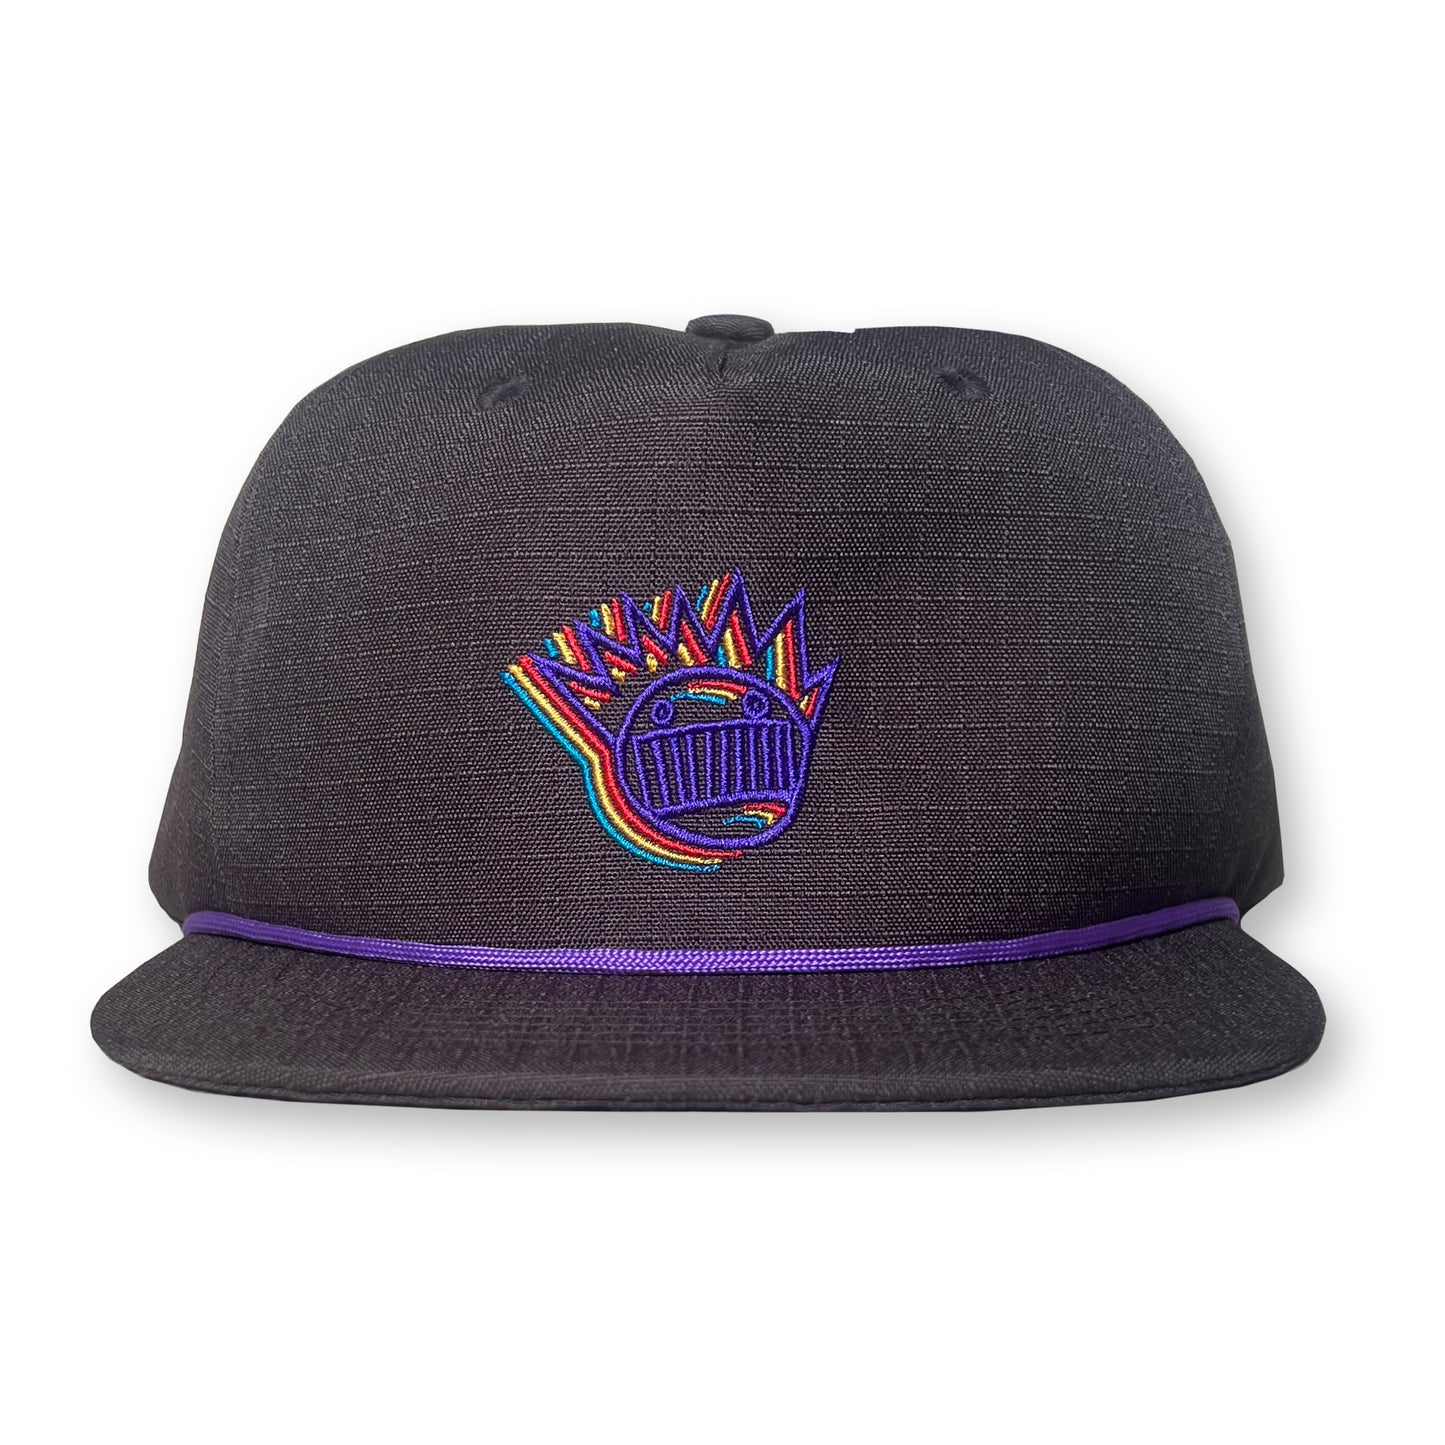 Ween Rope Hat / Cuban Ripstop Nylon with Violet Boognish